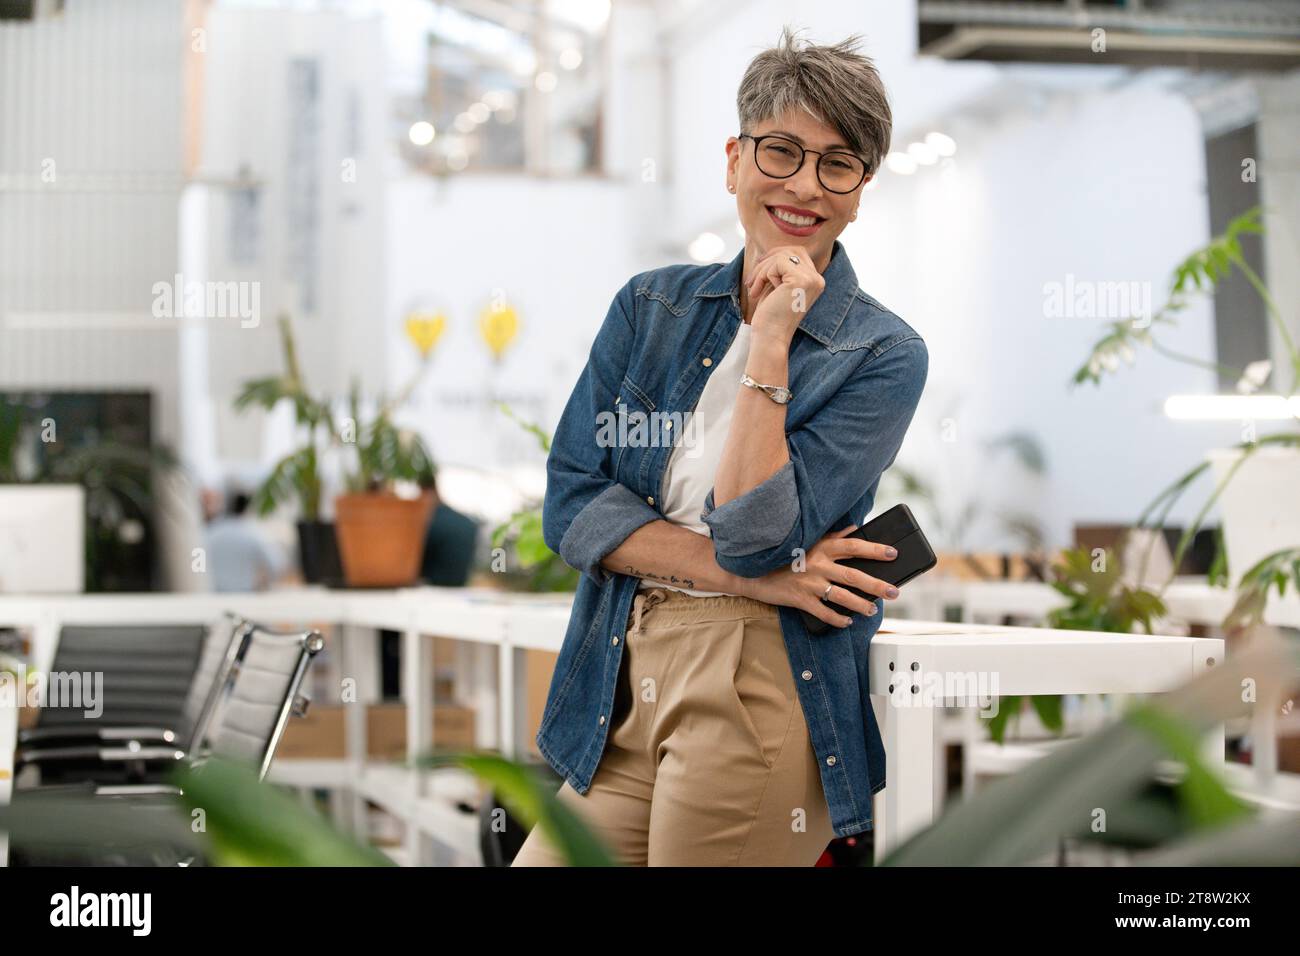 Female entrepreneur looking at the camera while standing indoors Stock Photo